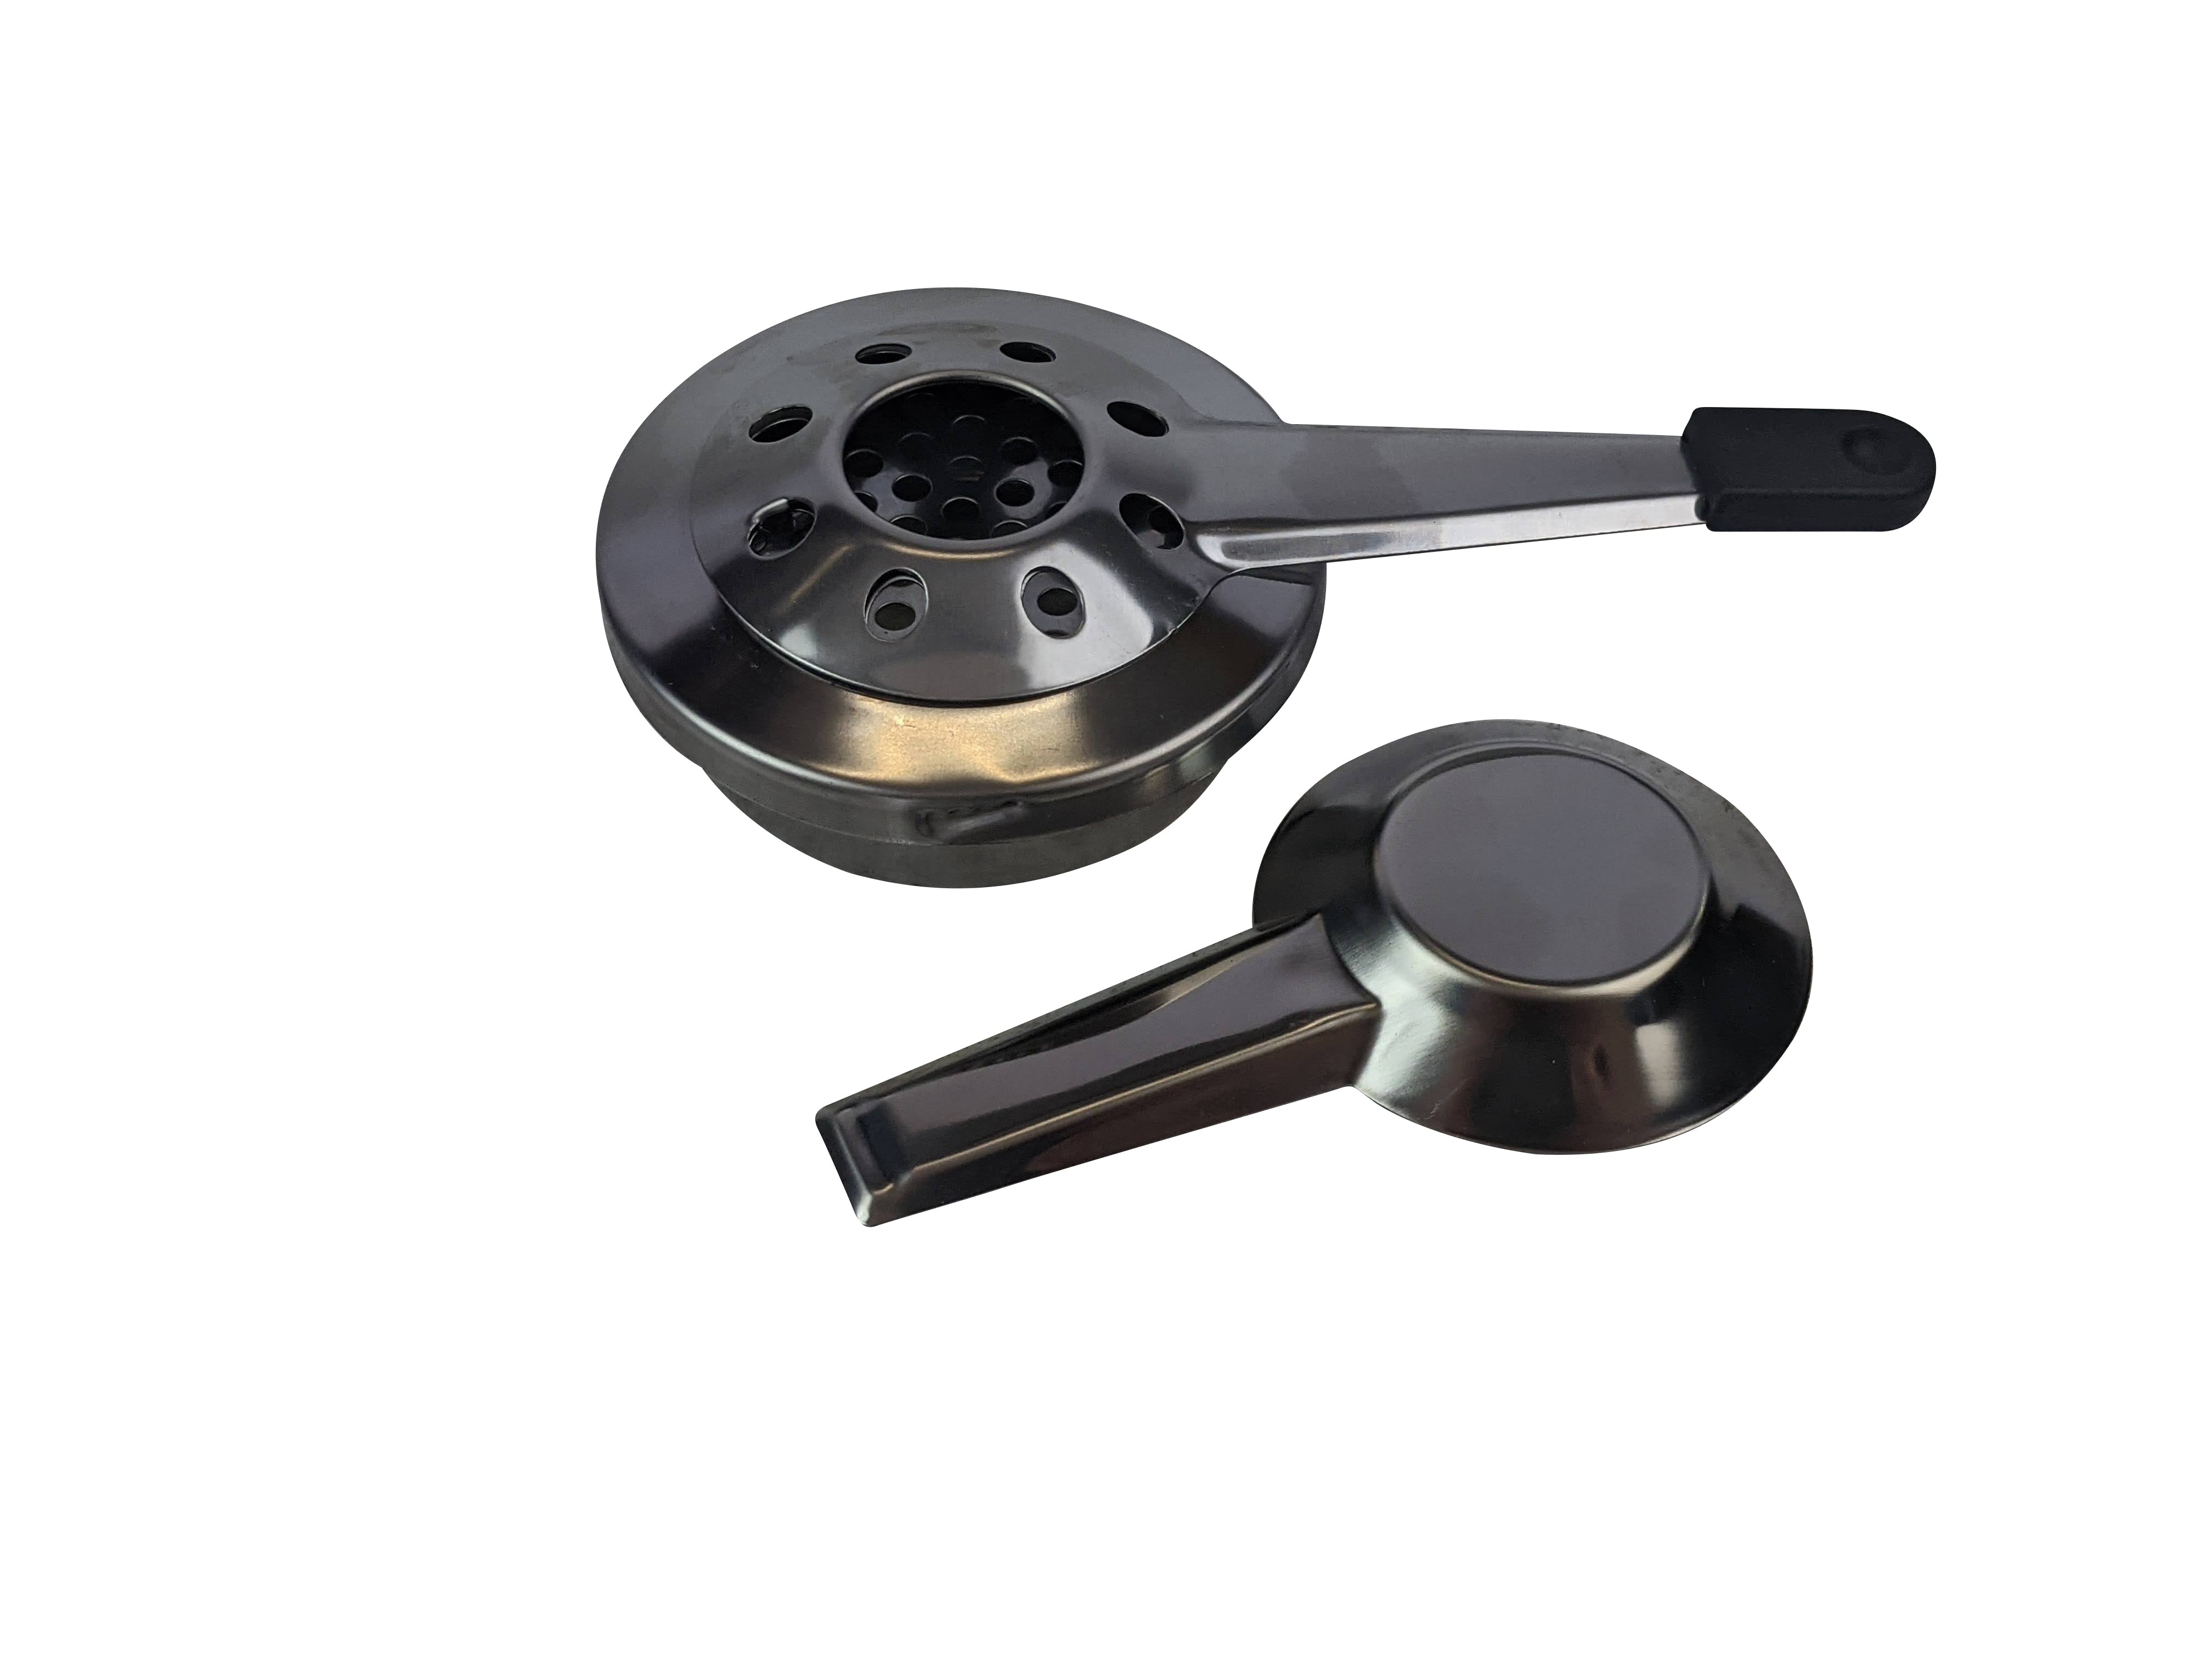 ressource lineær ozon Stainless Steel Fondue Burner | Fast Delivery